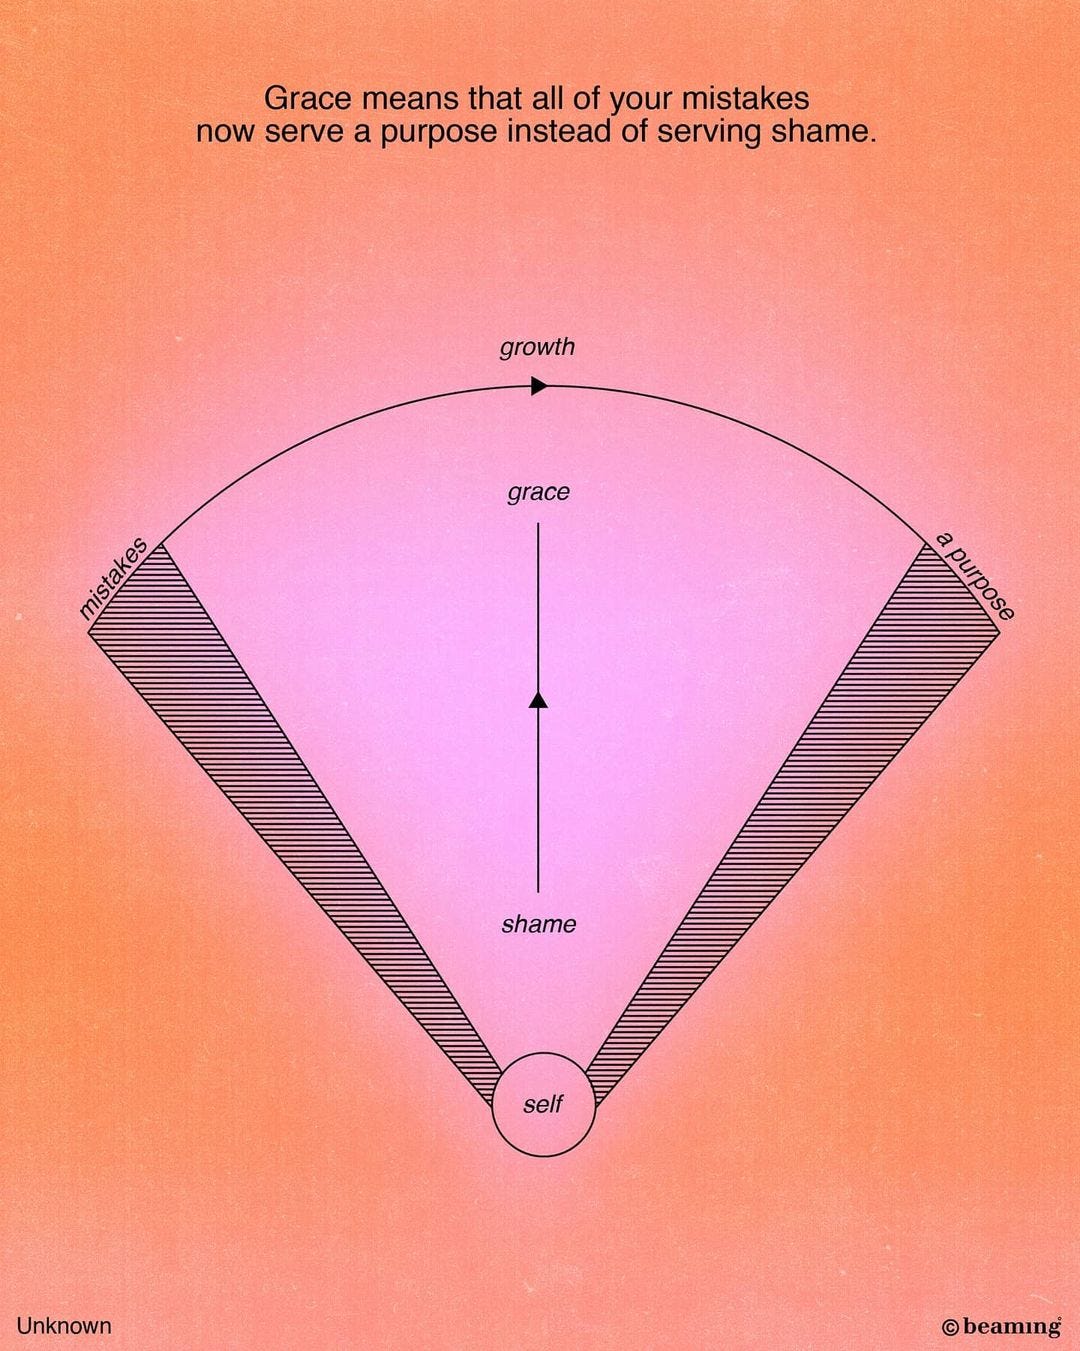 The quote "Grace means that all of our mistakes now serve a purpose instead of serving shame" is overlaid an orange-pink gradient, accompanied by a graphic showing how when shame moves toward grace, it feeds growth. 